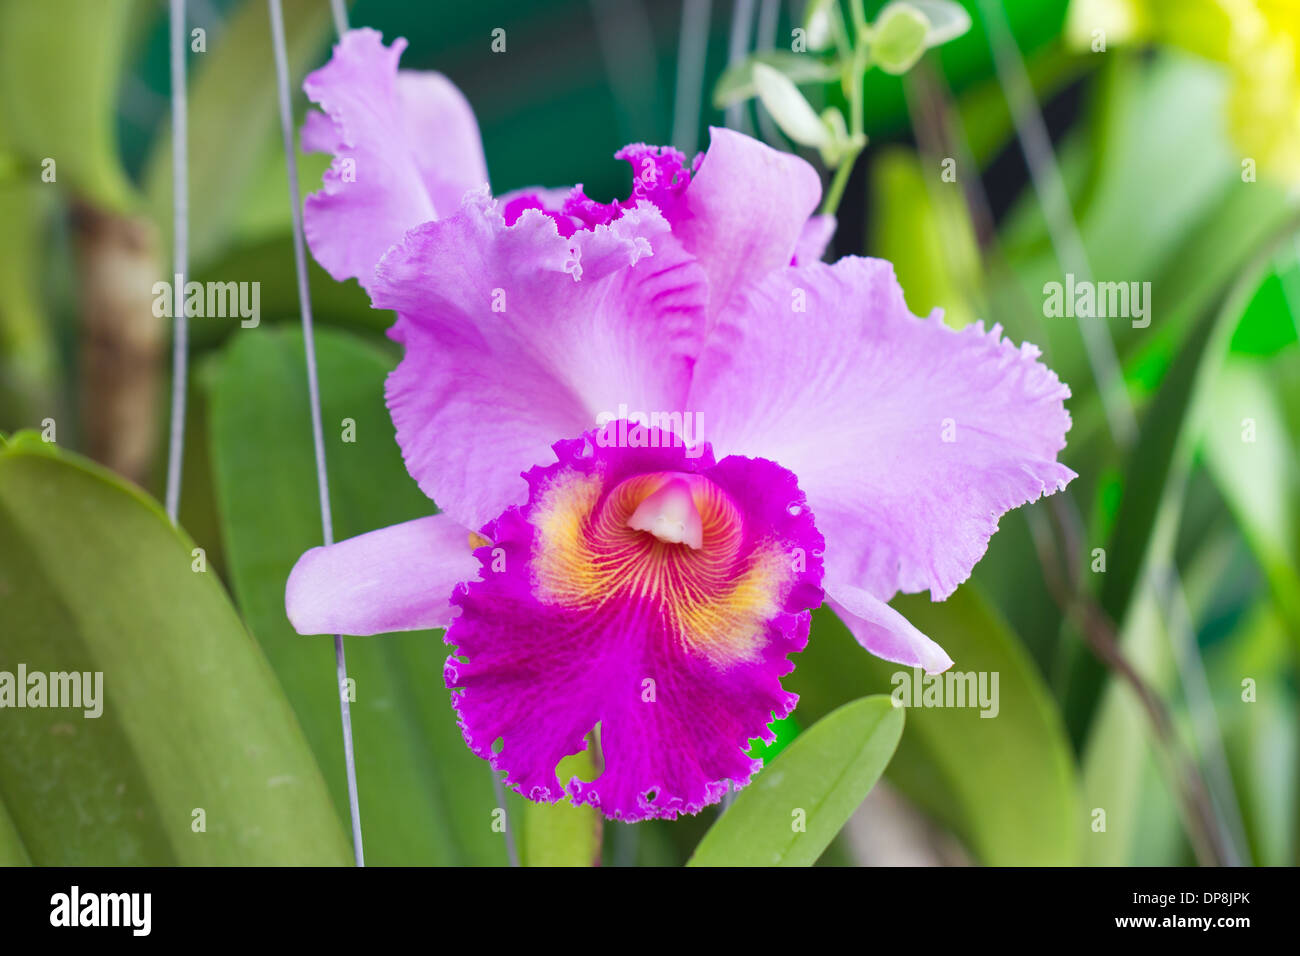 Rosa cattleya orchid fiore. Foto Stock